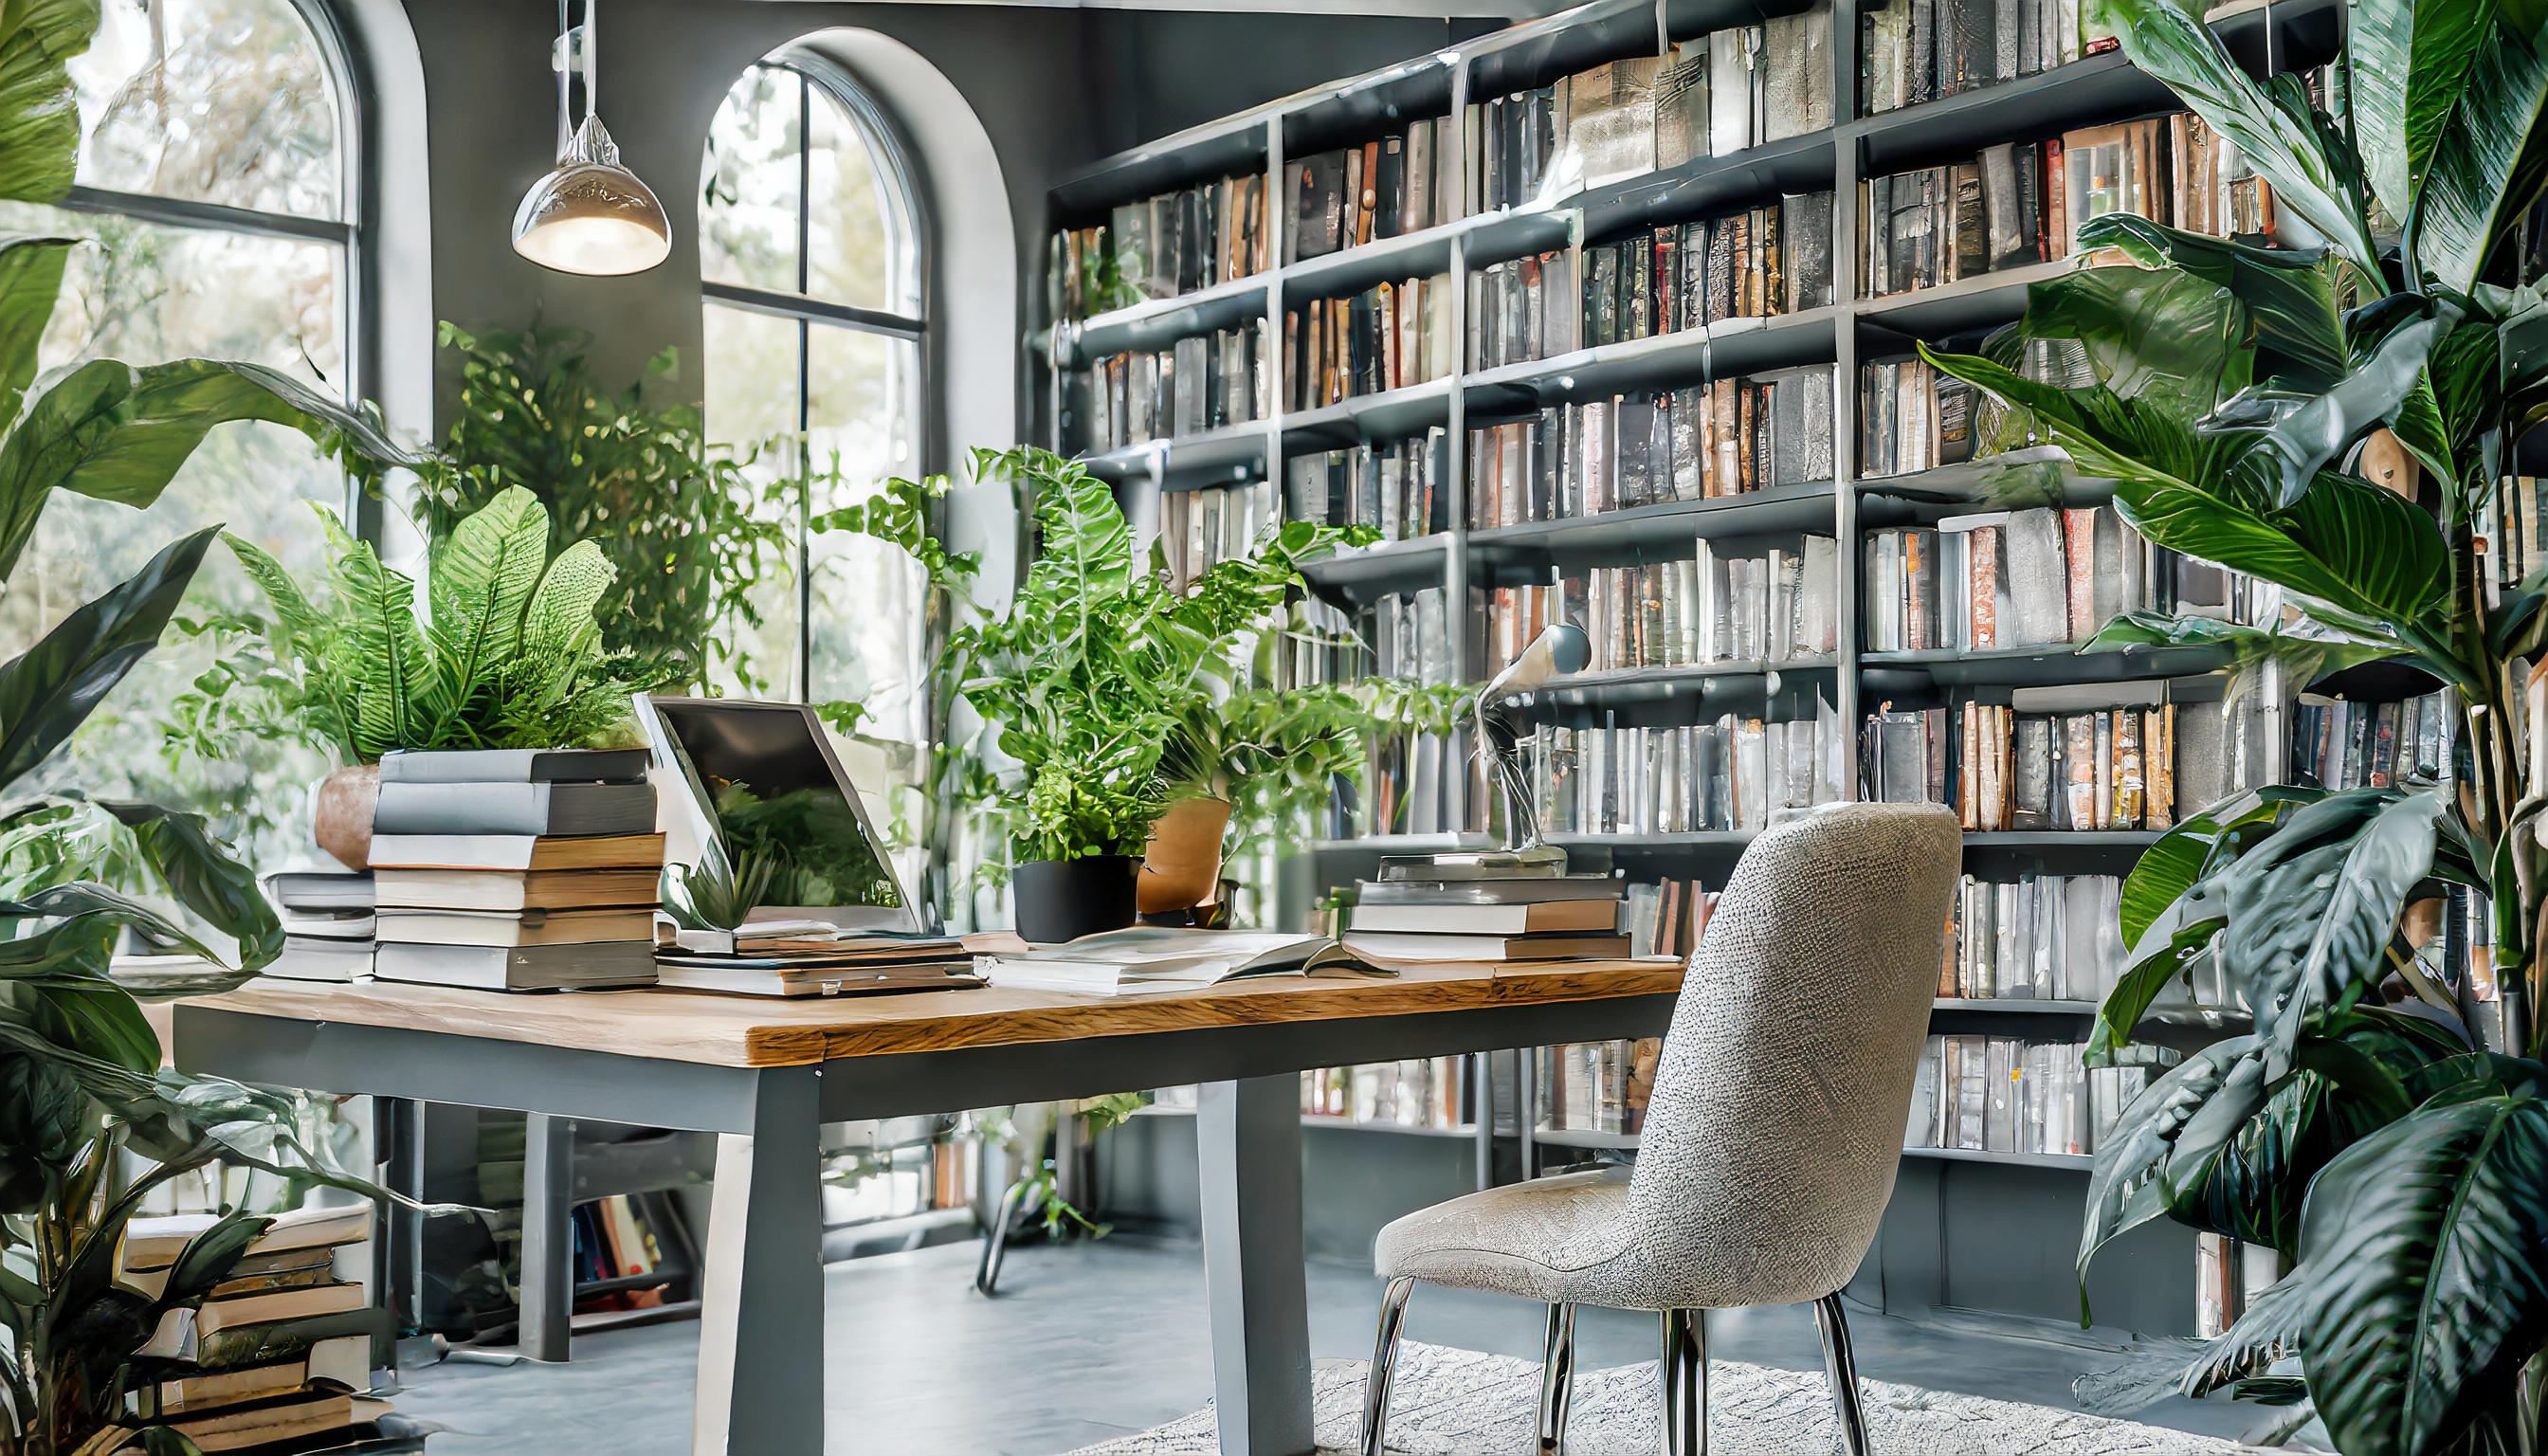 Sustainable Office setting in a library